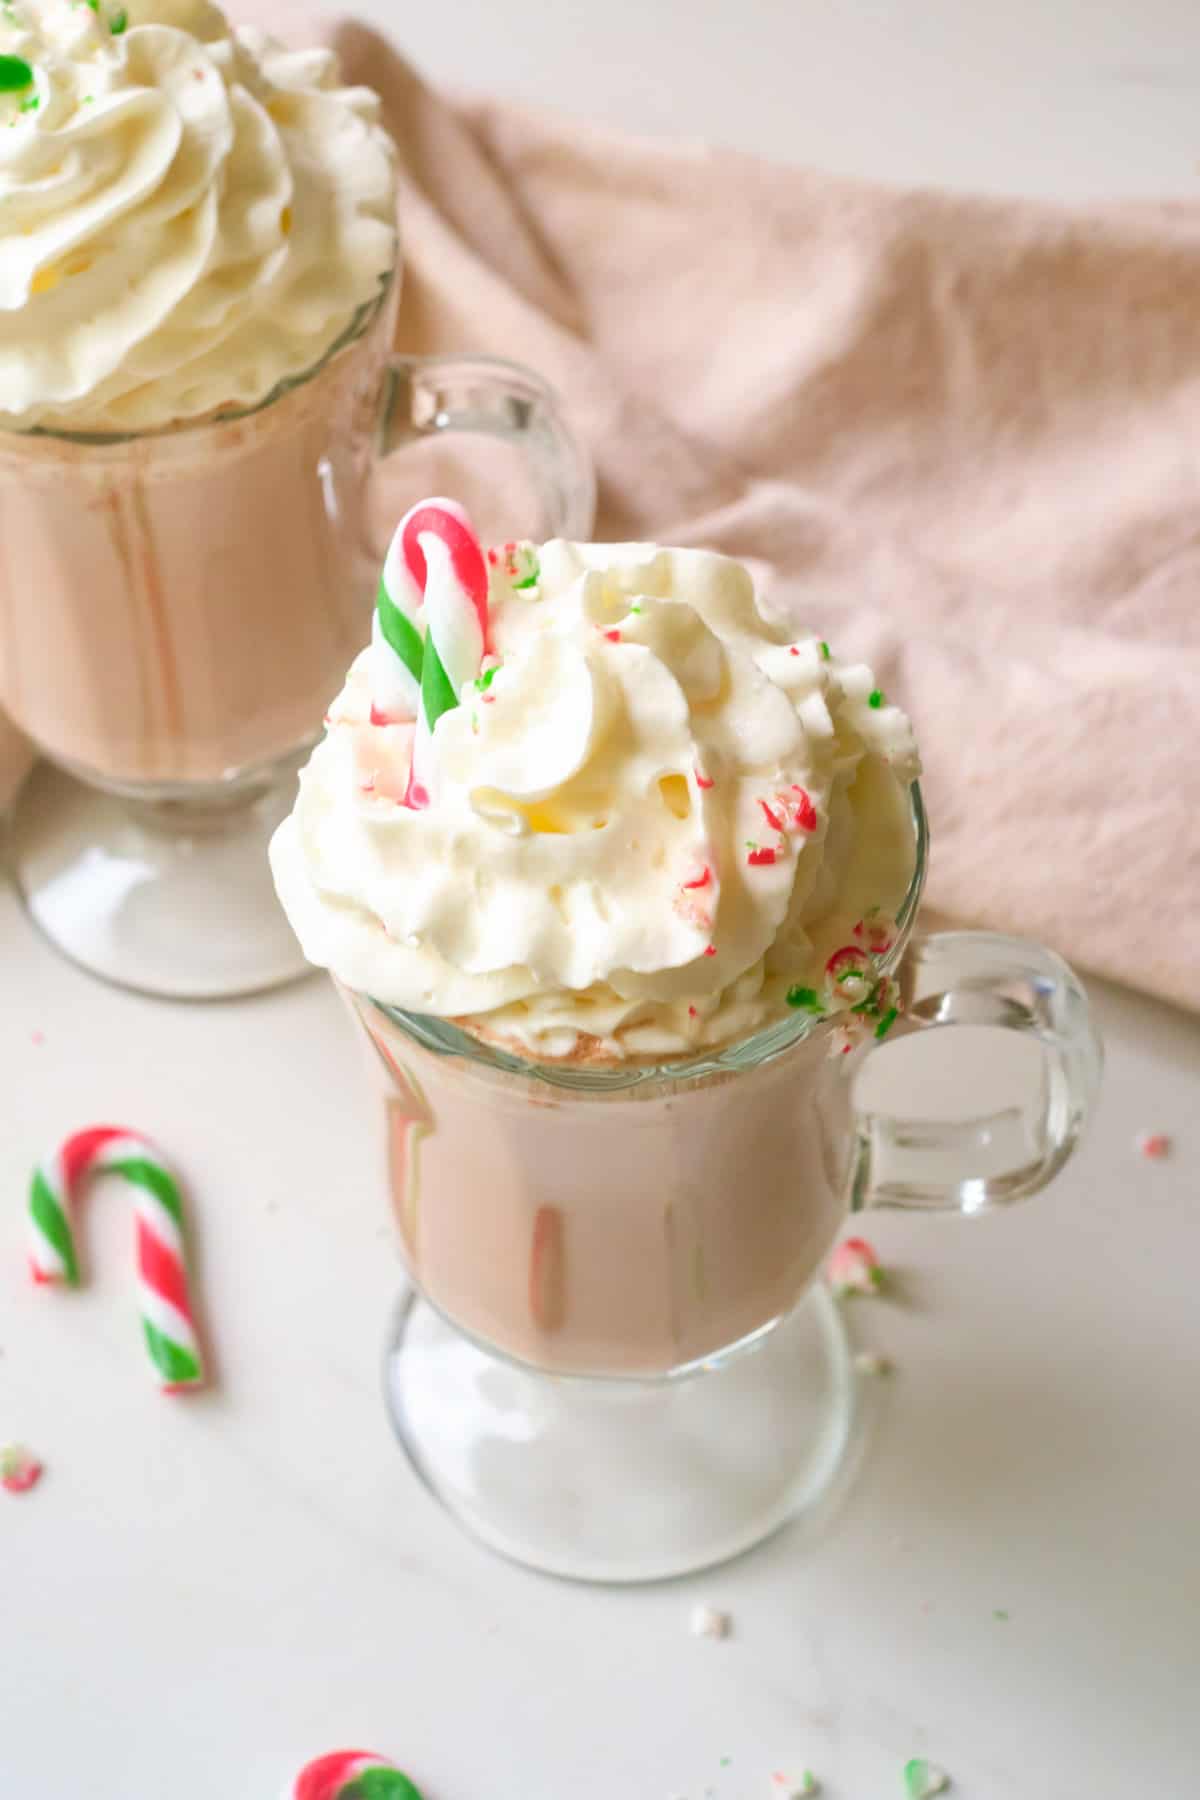 Candy cane sticking out of whipped cream on top of hot chocolate.